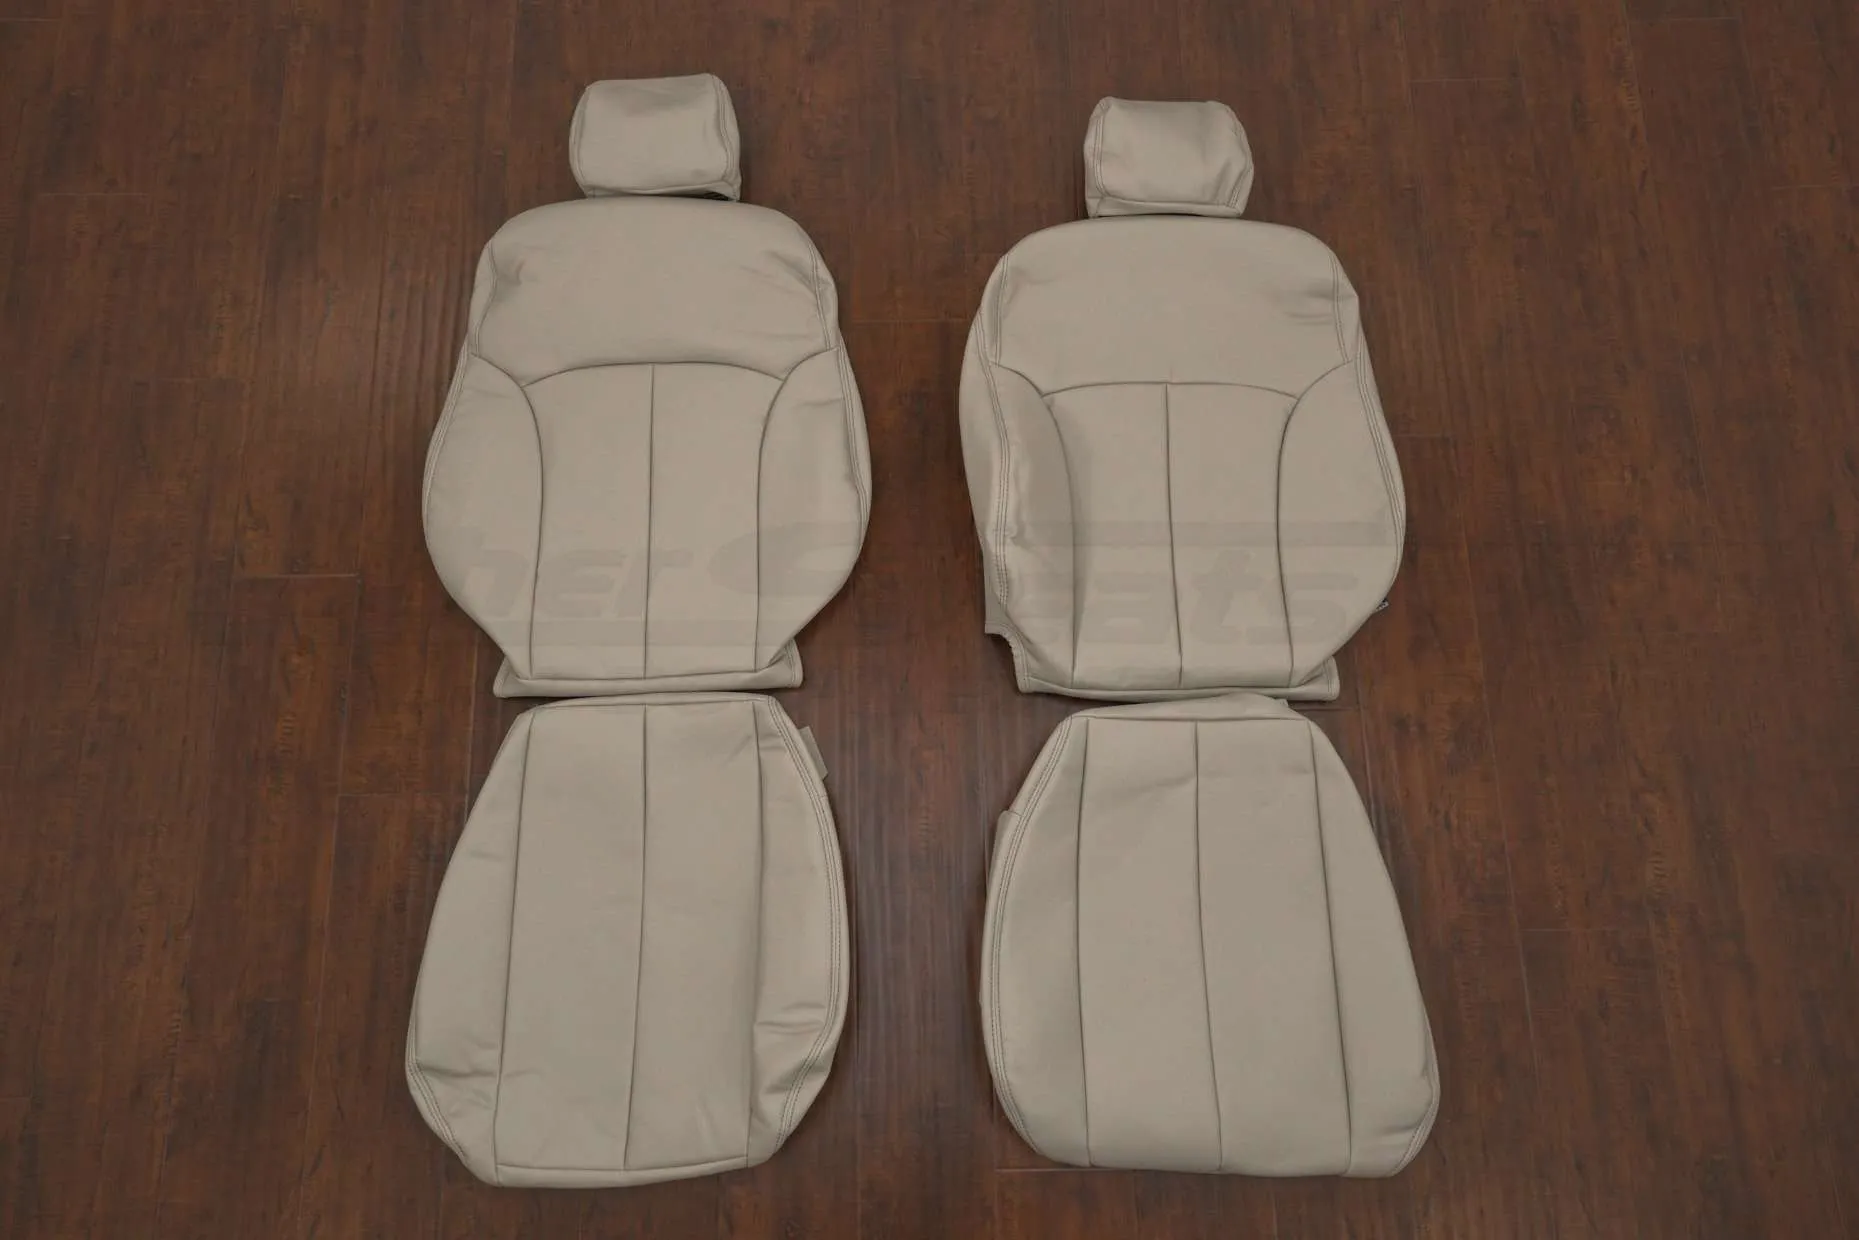 Subaru Outback Leather Seat Kit- Dune - Front seat upholstery